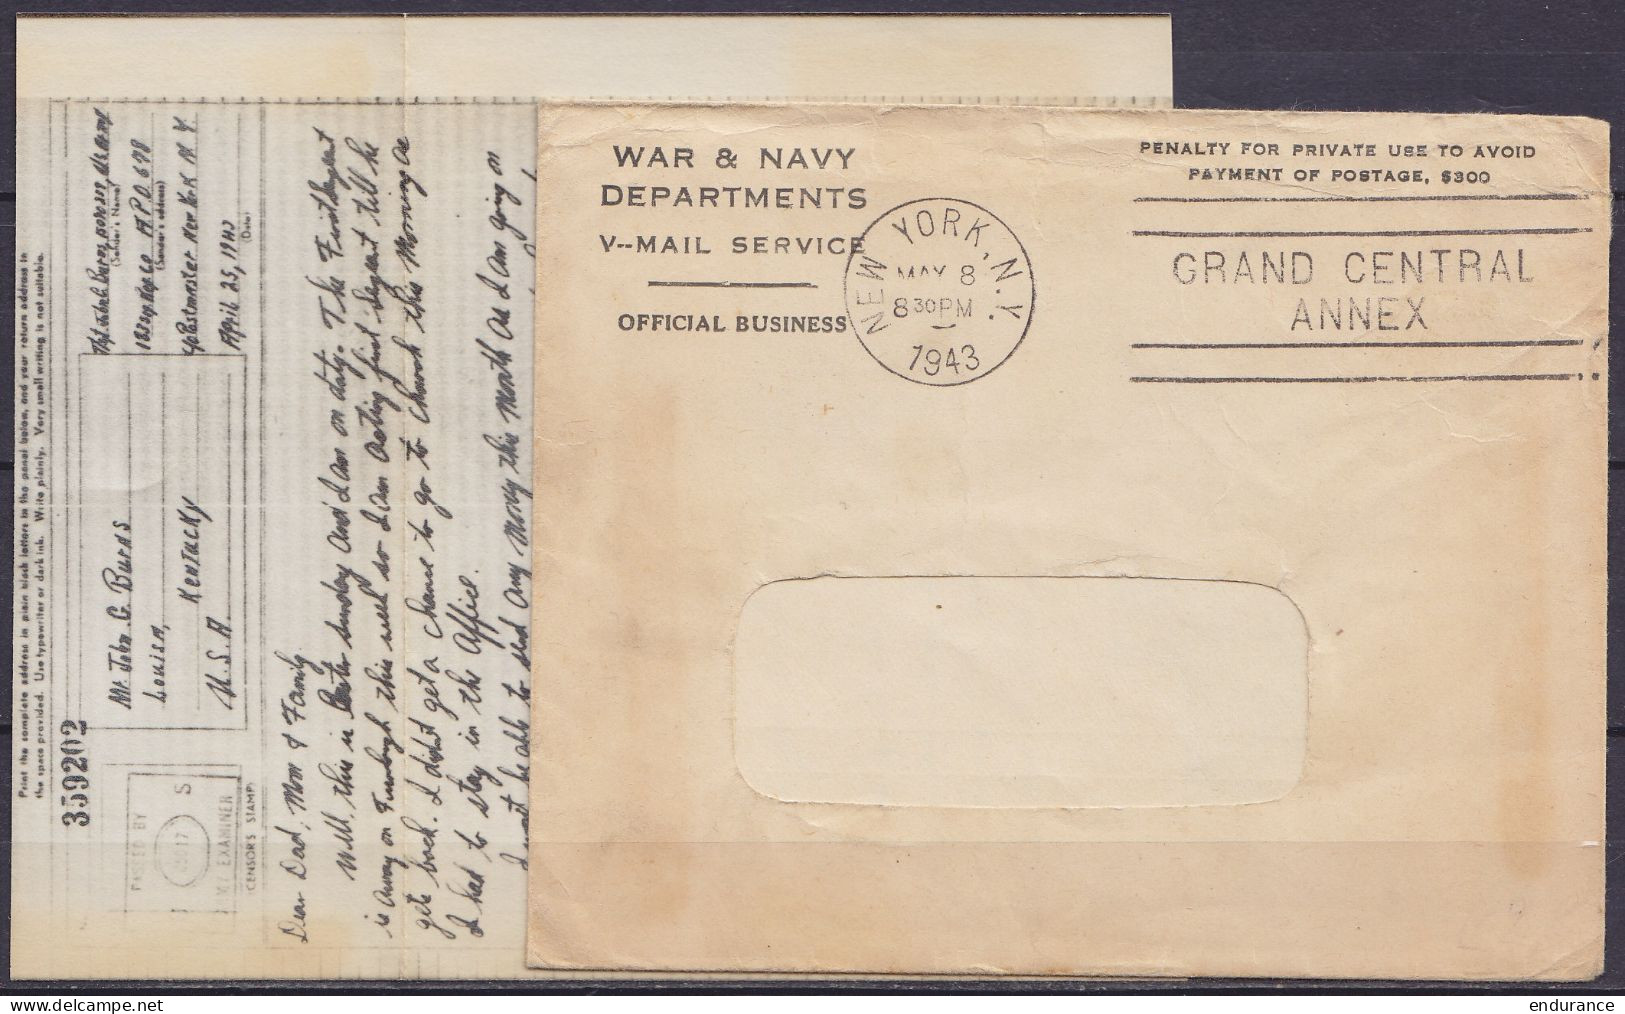 USA - V-MAIL WAR & NAVY DEPARTMENT Flam. "NEW YORK /MAY 8 1943/ GRAND CENTRAL ANNEX" Pour LOUISA Kentucky - Covers & Documents